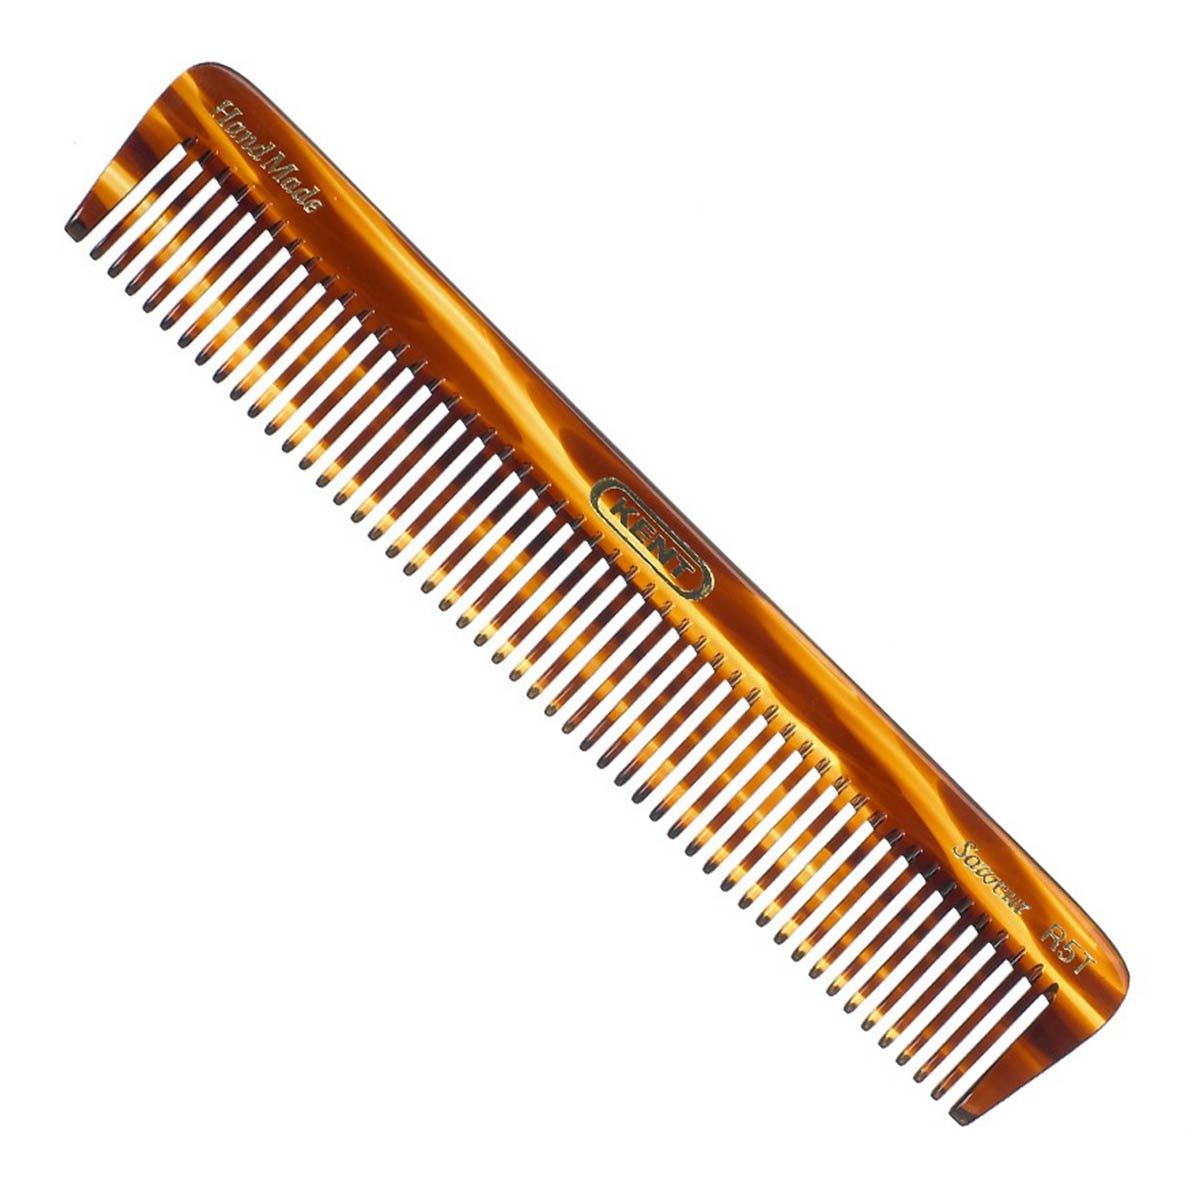 Primary image of 170mm Dressing Table Comb R5T